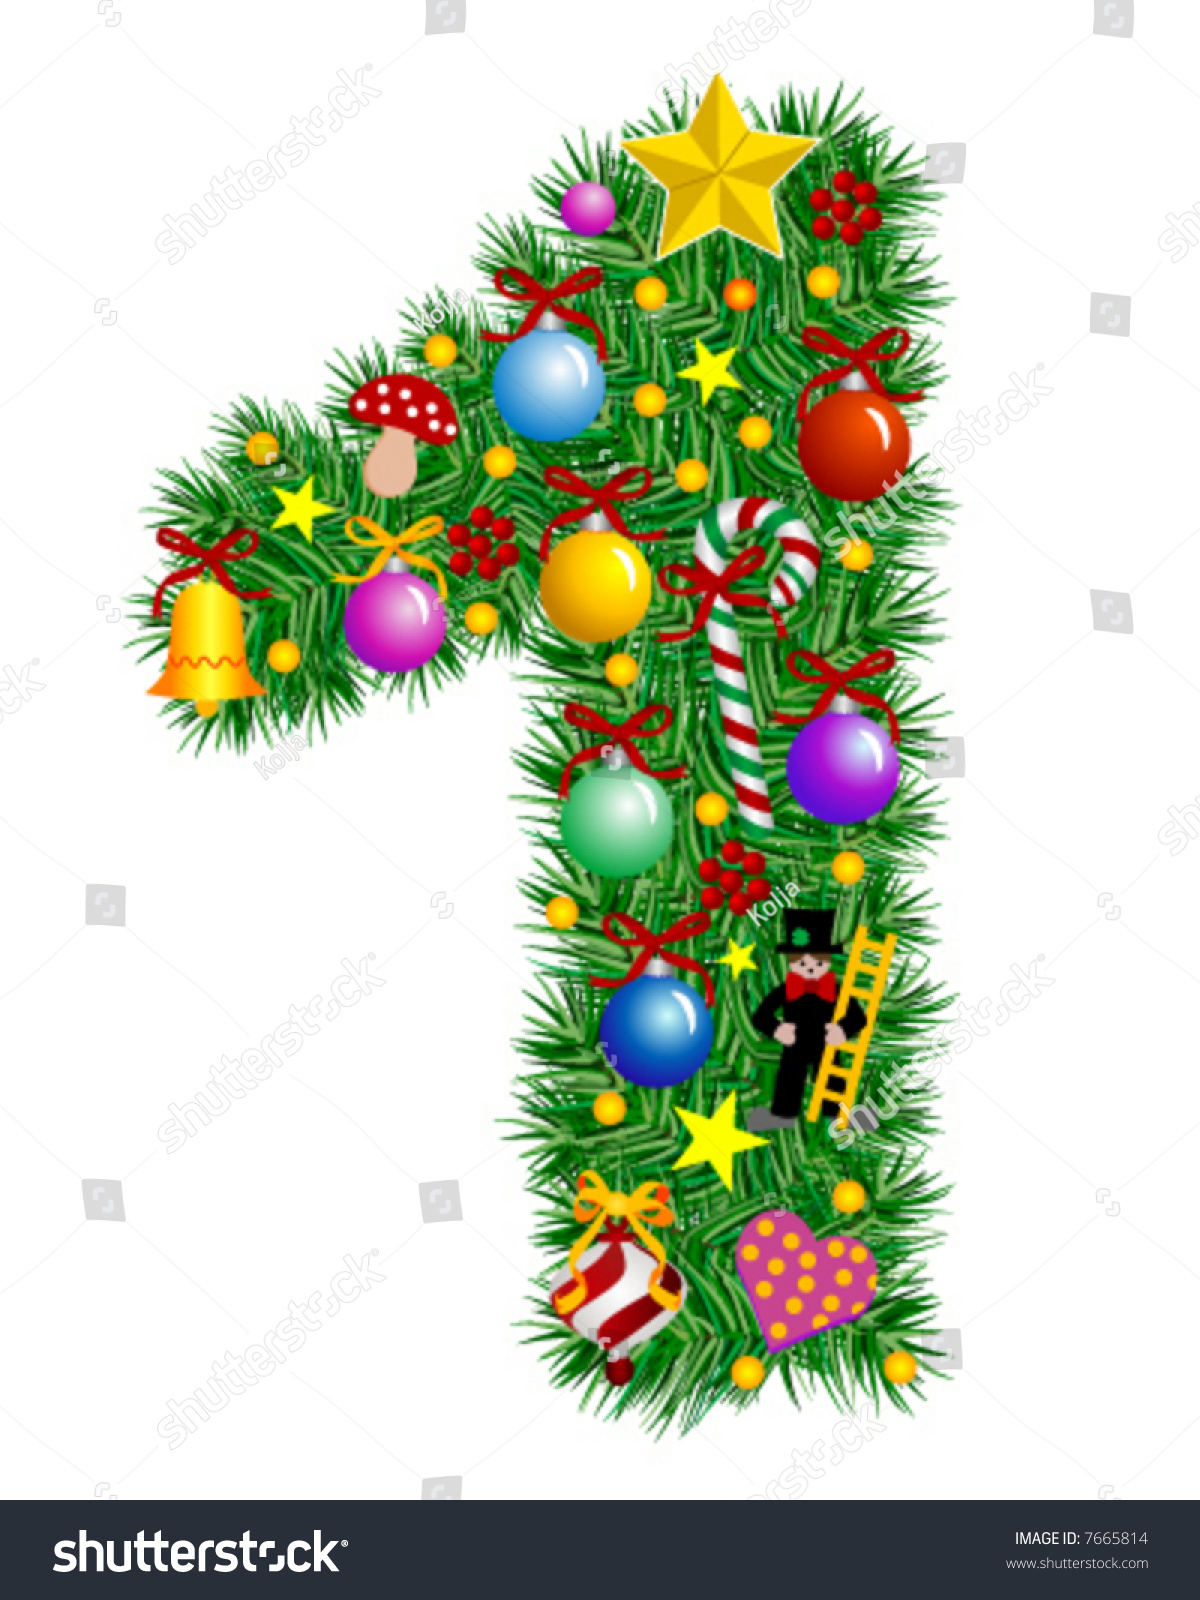 Number 1 Christmas Tree Decoration Part Of A Full Set Vector